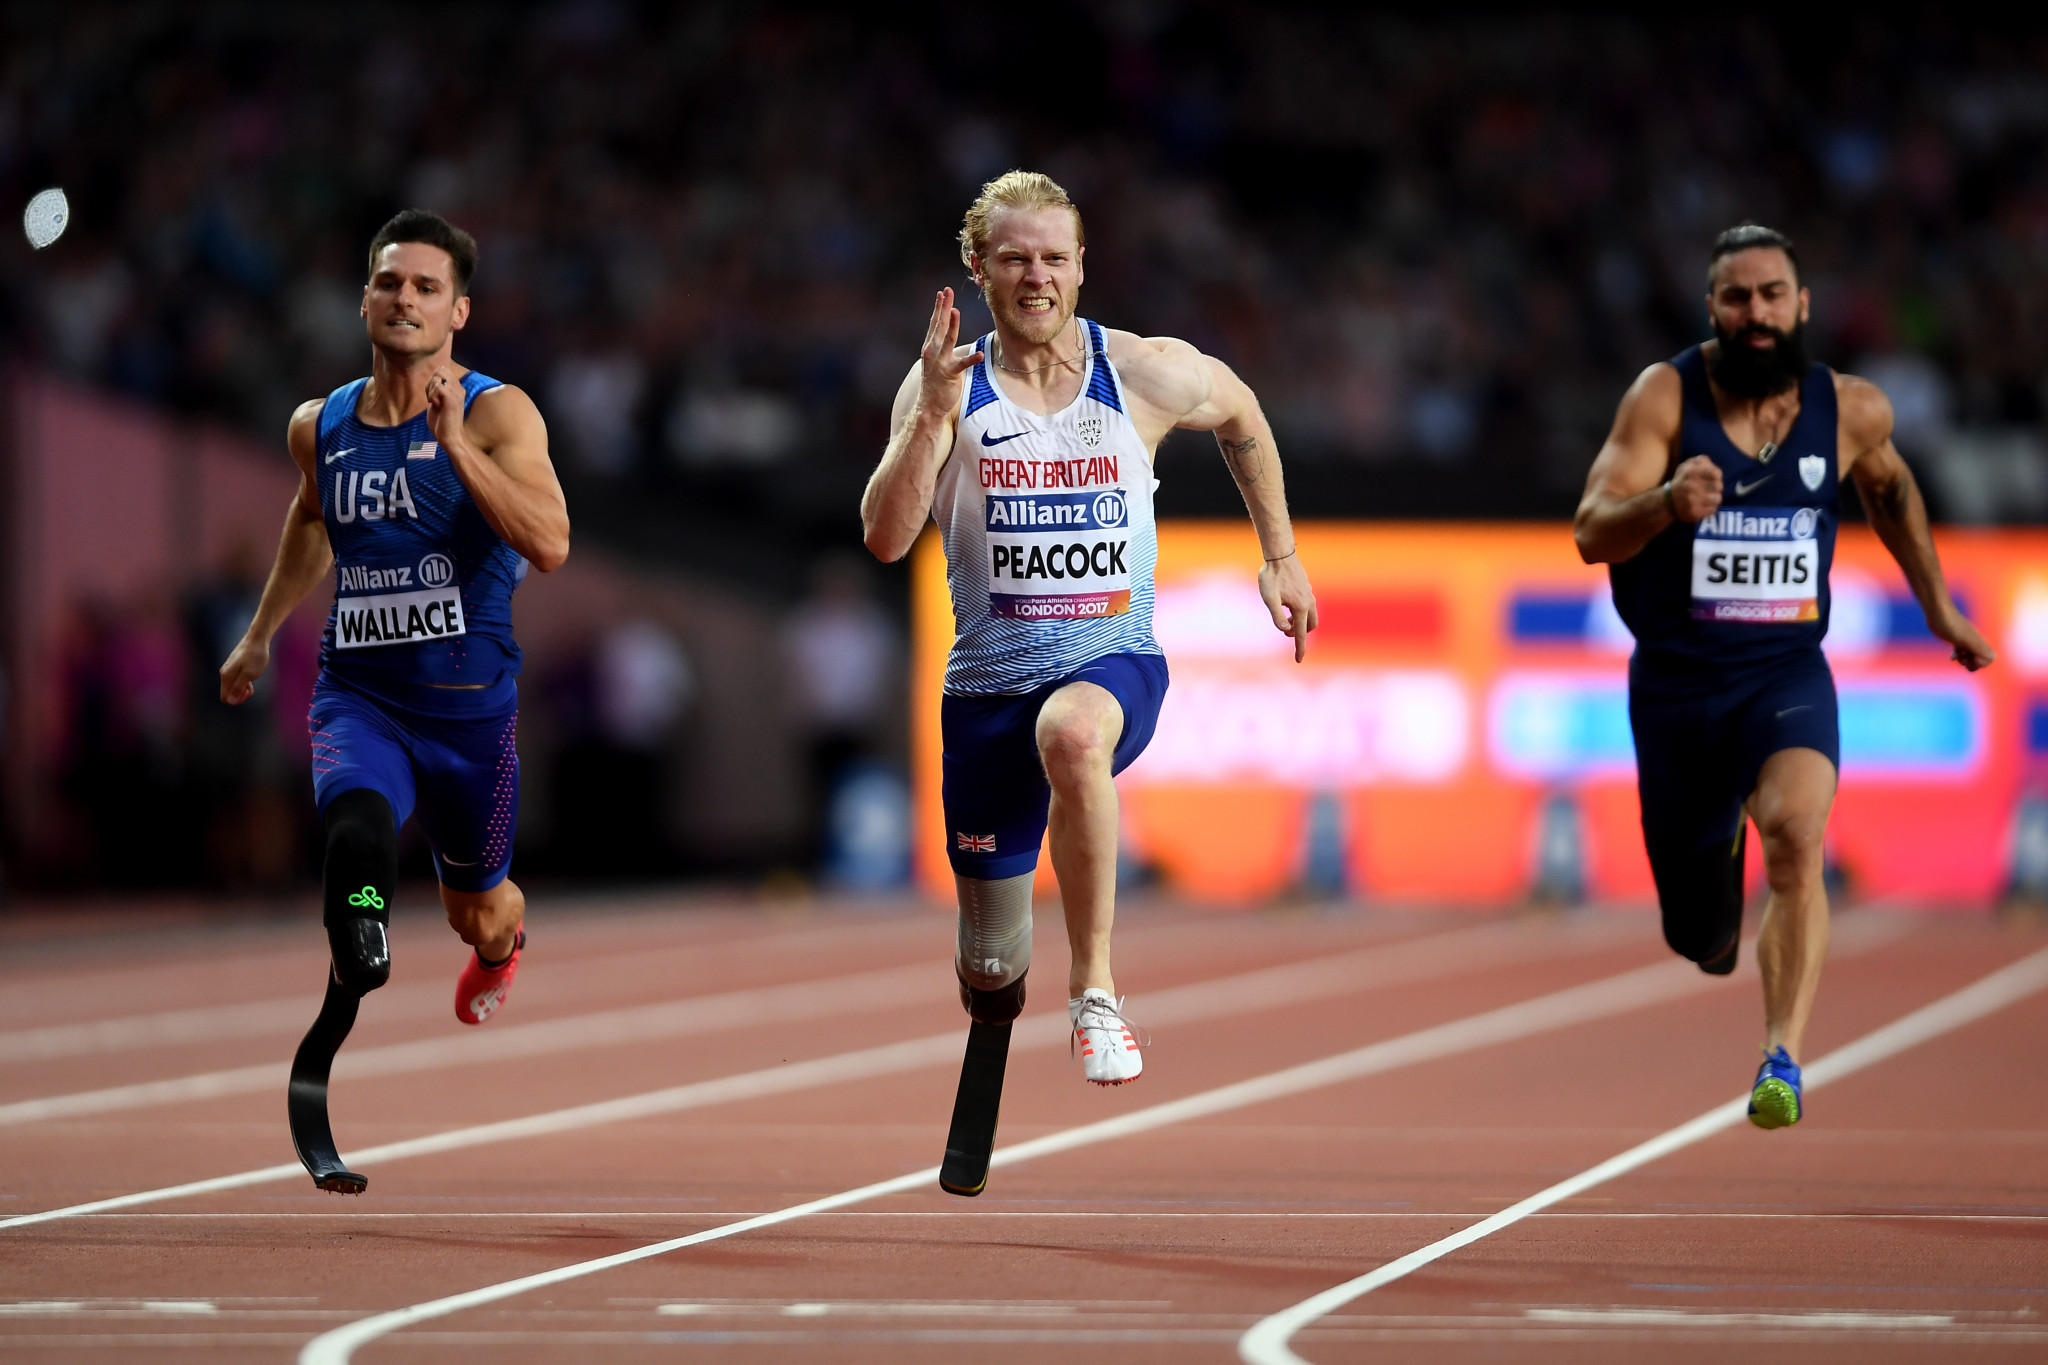 Jonnie Peacock, the London 2012 and Rio 2016 Paralympic champion in the 100 metres T44, is among those set to be affected by the revision to the Para-athletics classification system ©Getty Images